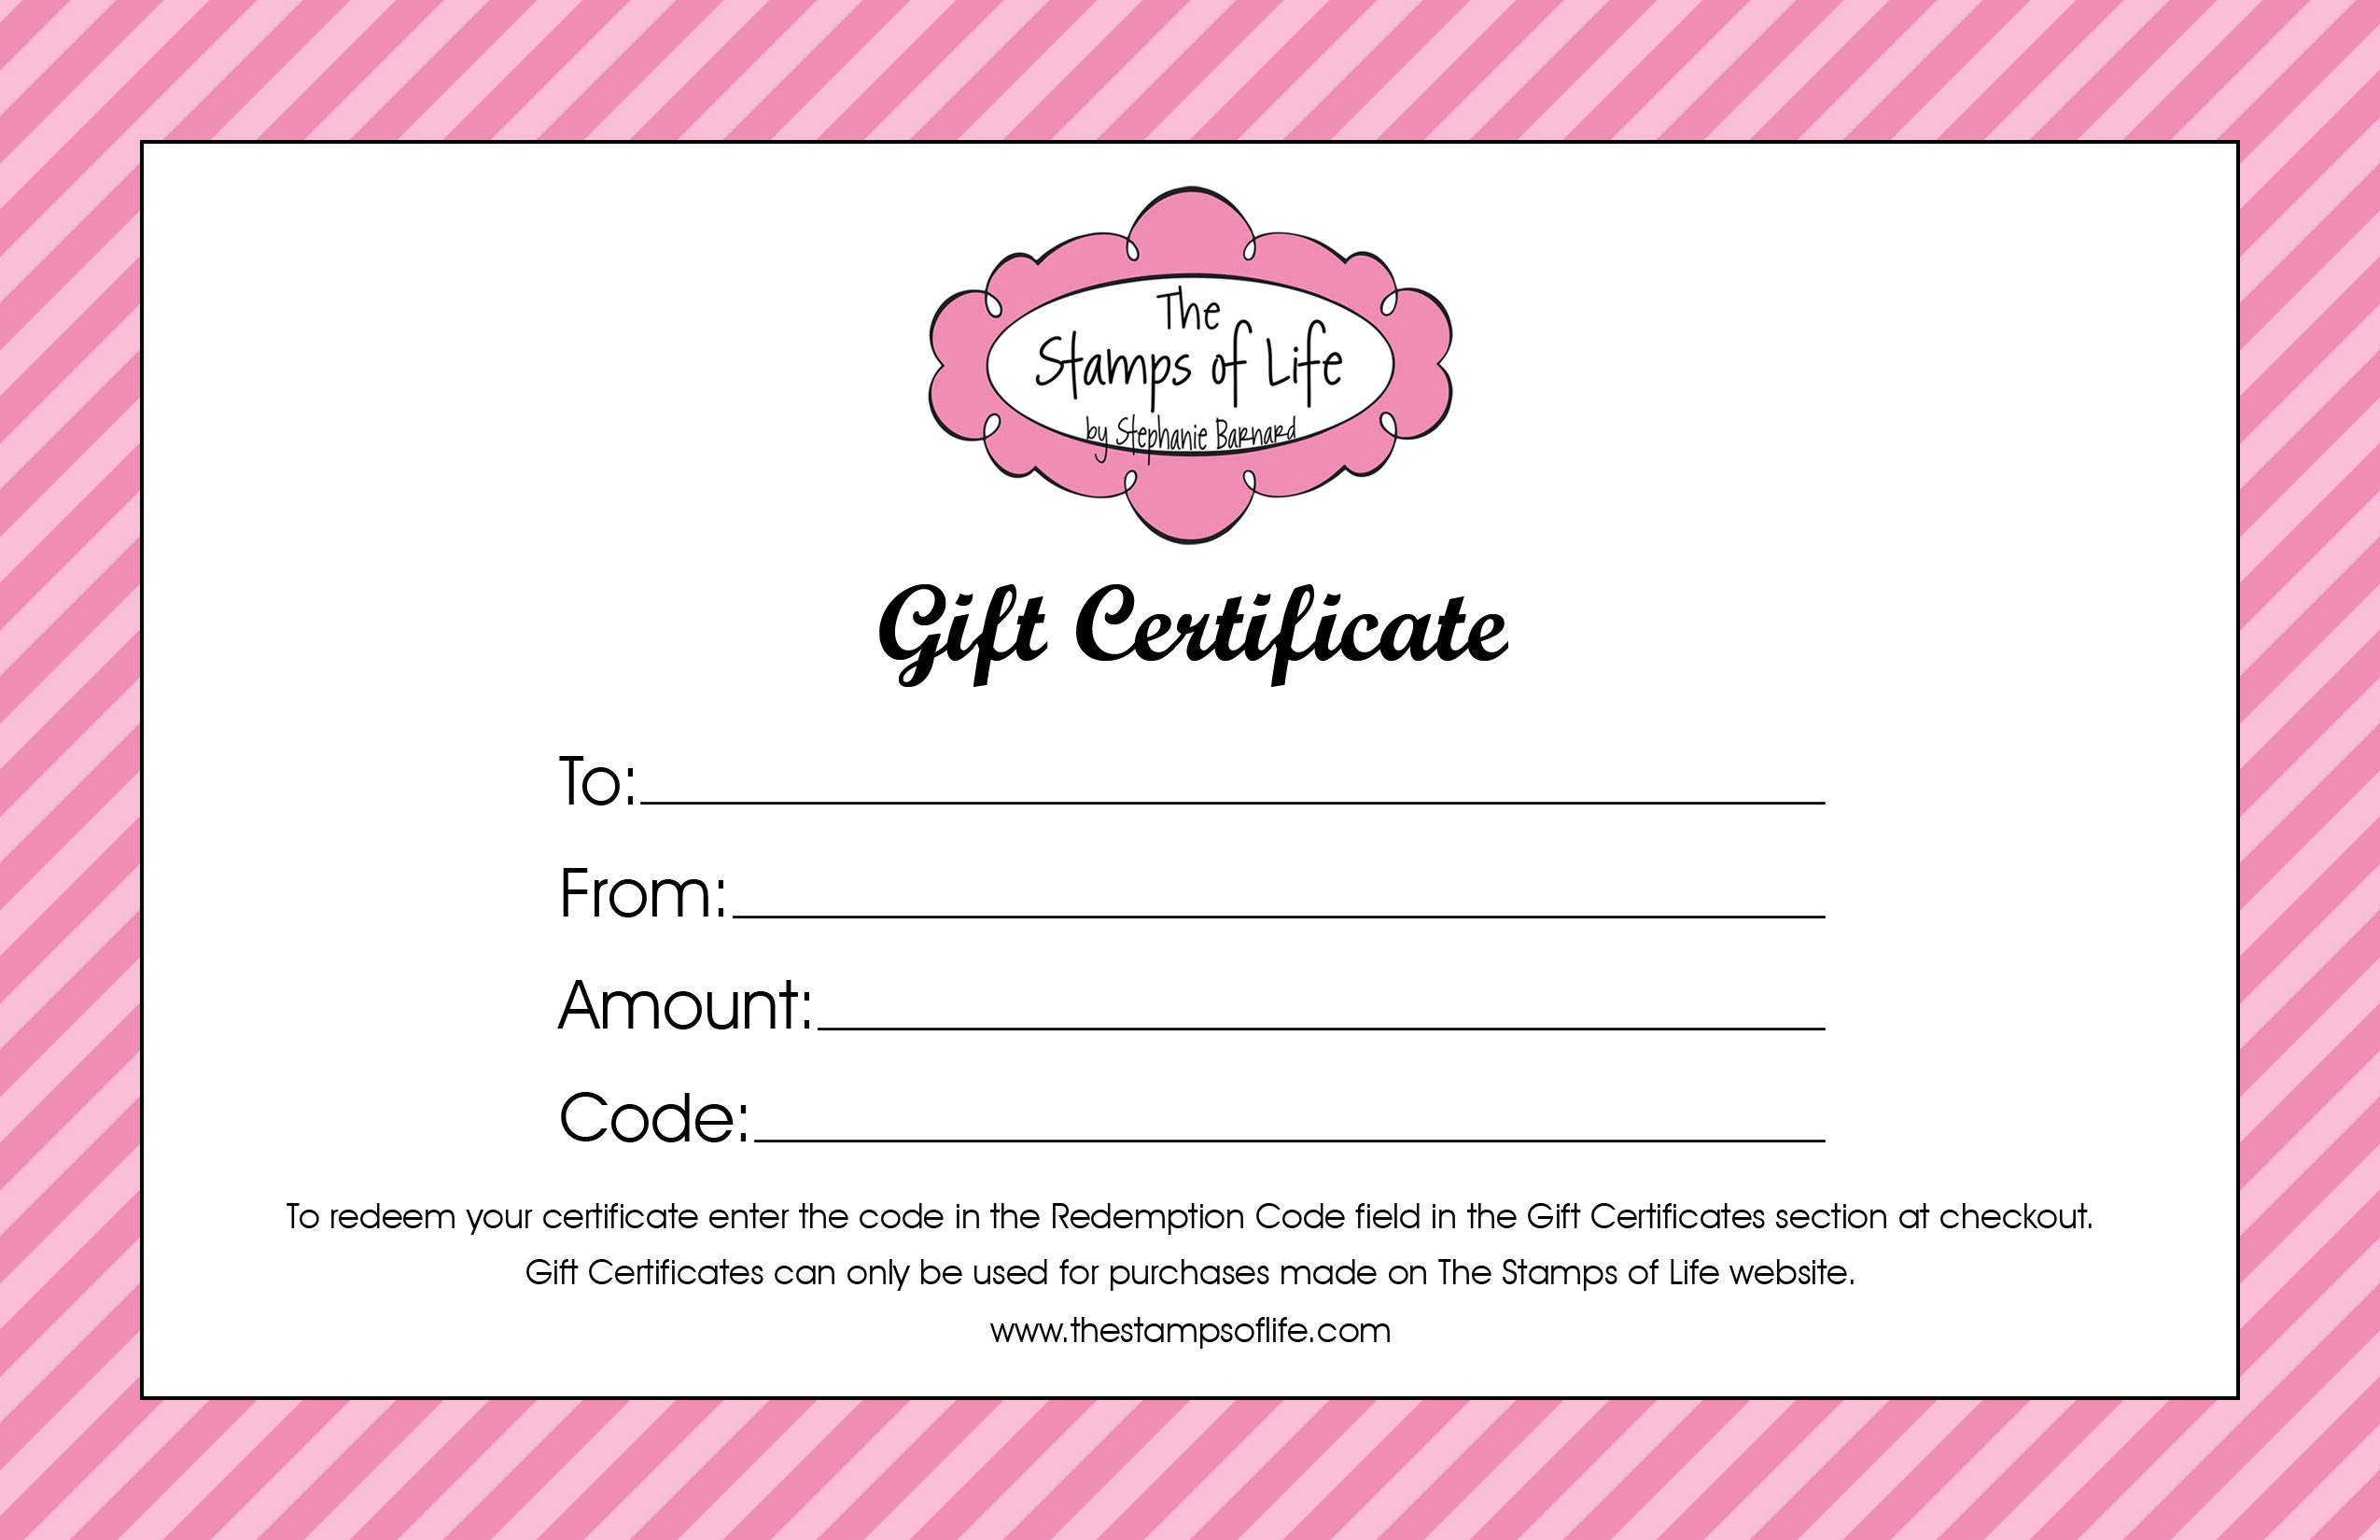 gym christmas gift certificate word template free download microsoft